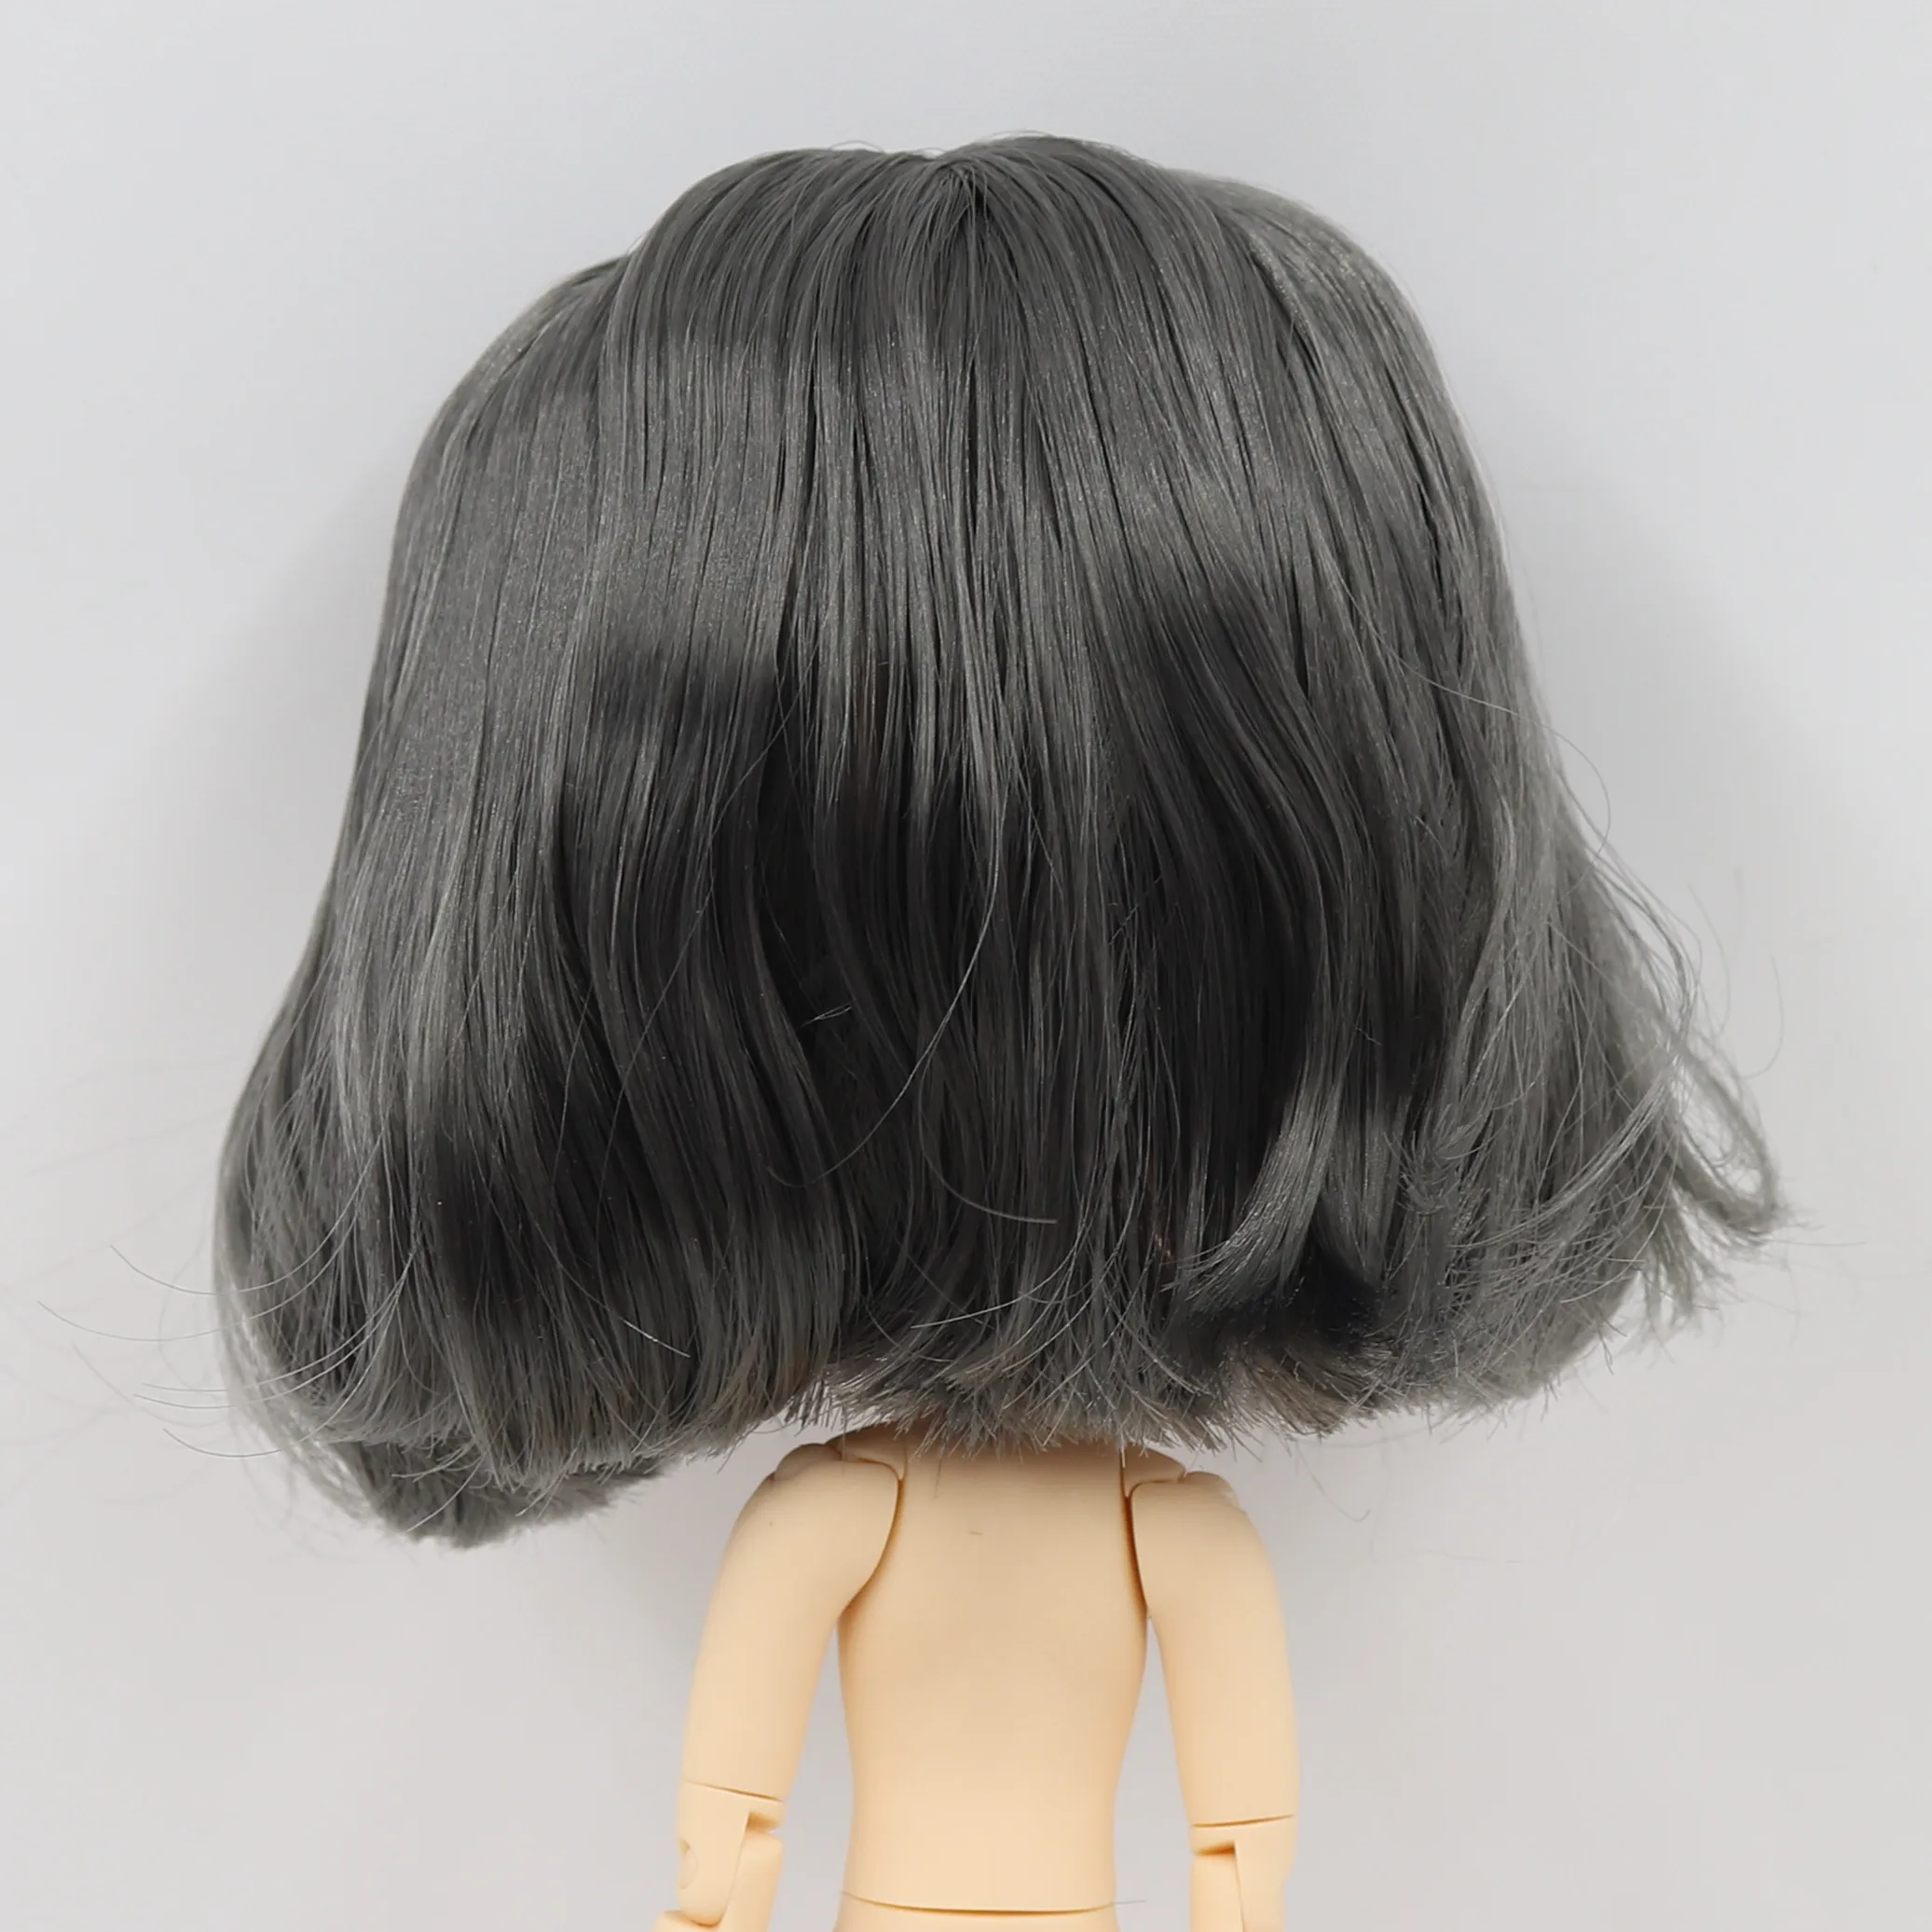 Middie Blythe Doll Hair Premium Black Wig With Scalp Dome 1